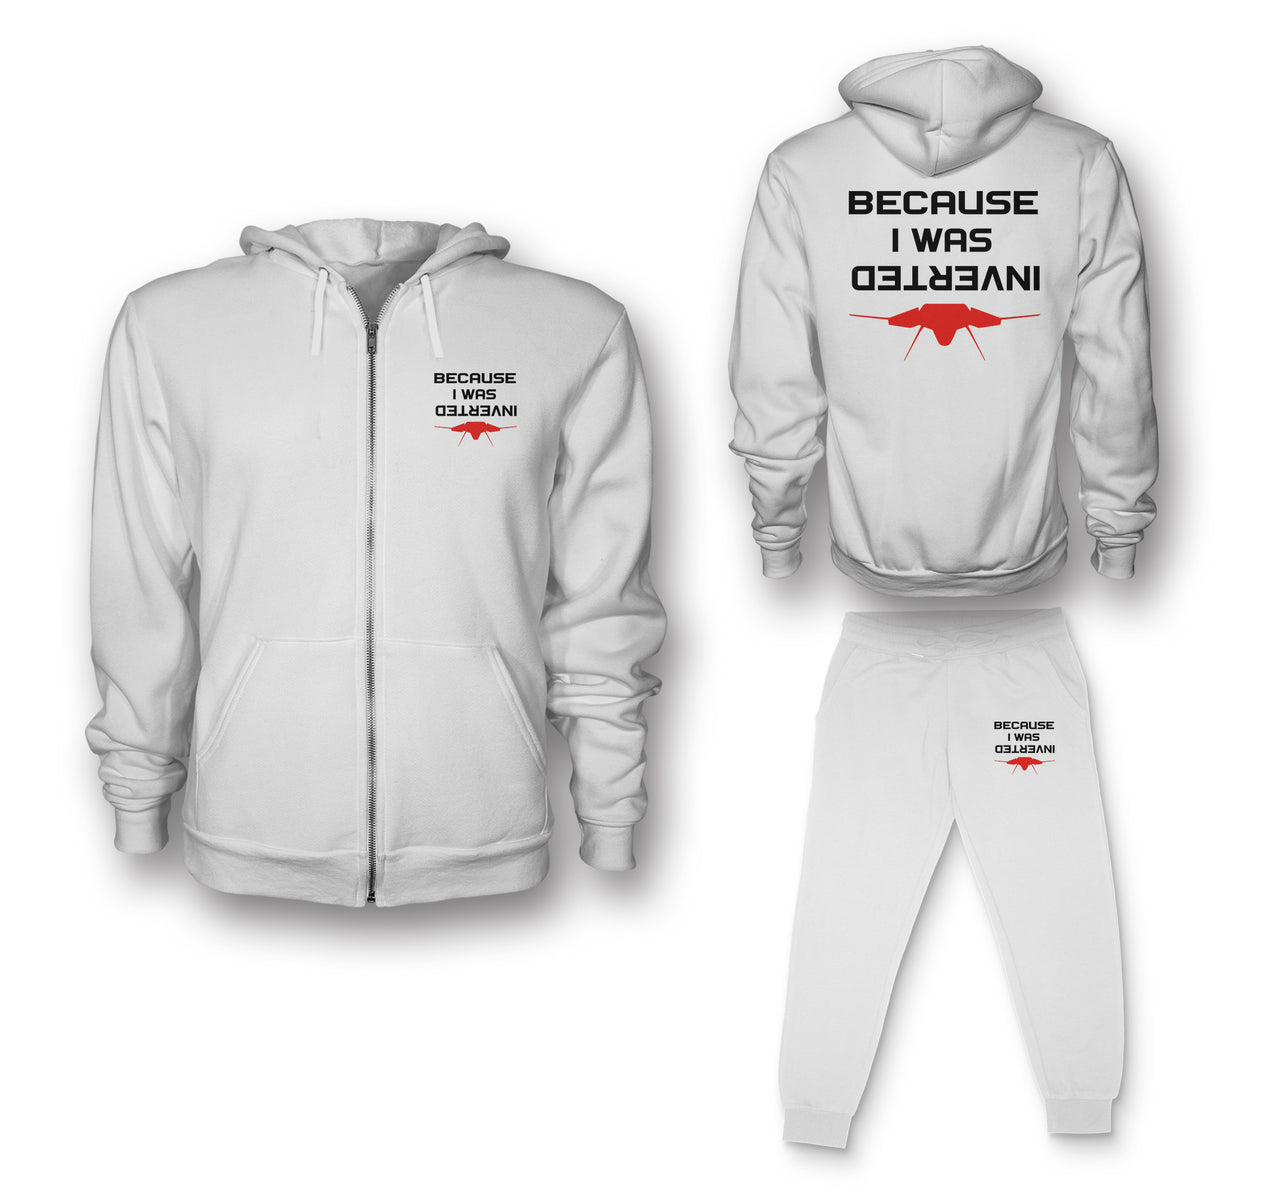 Because I was Inverted Designed Zipped Hoodies & Sweatpants Set